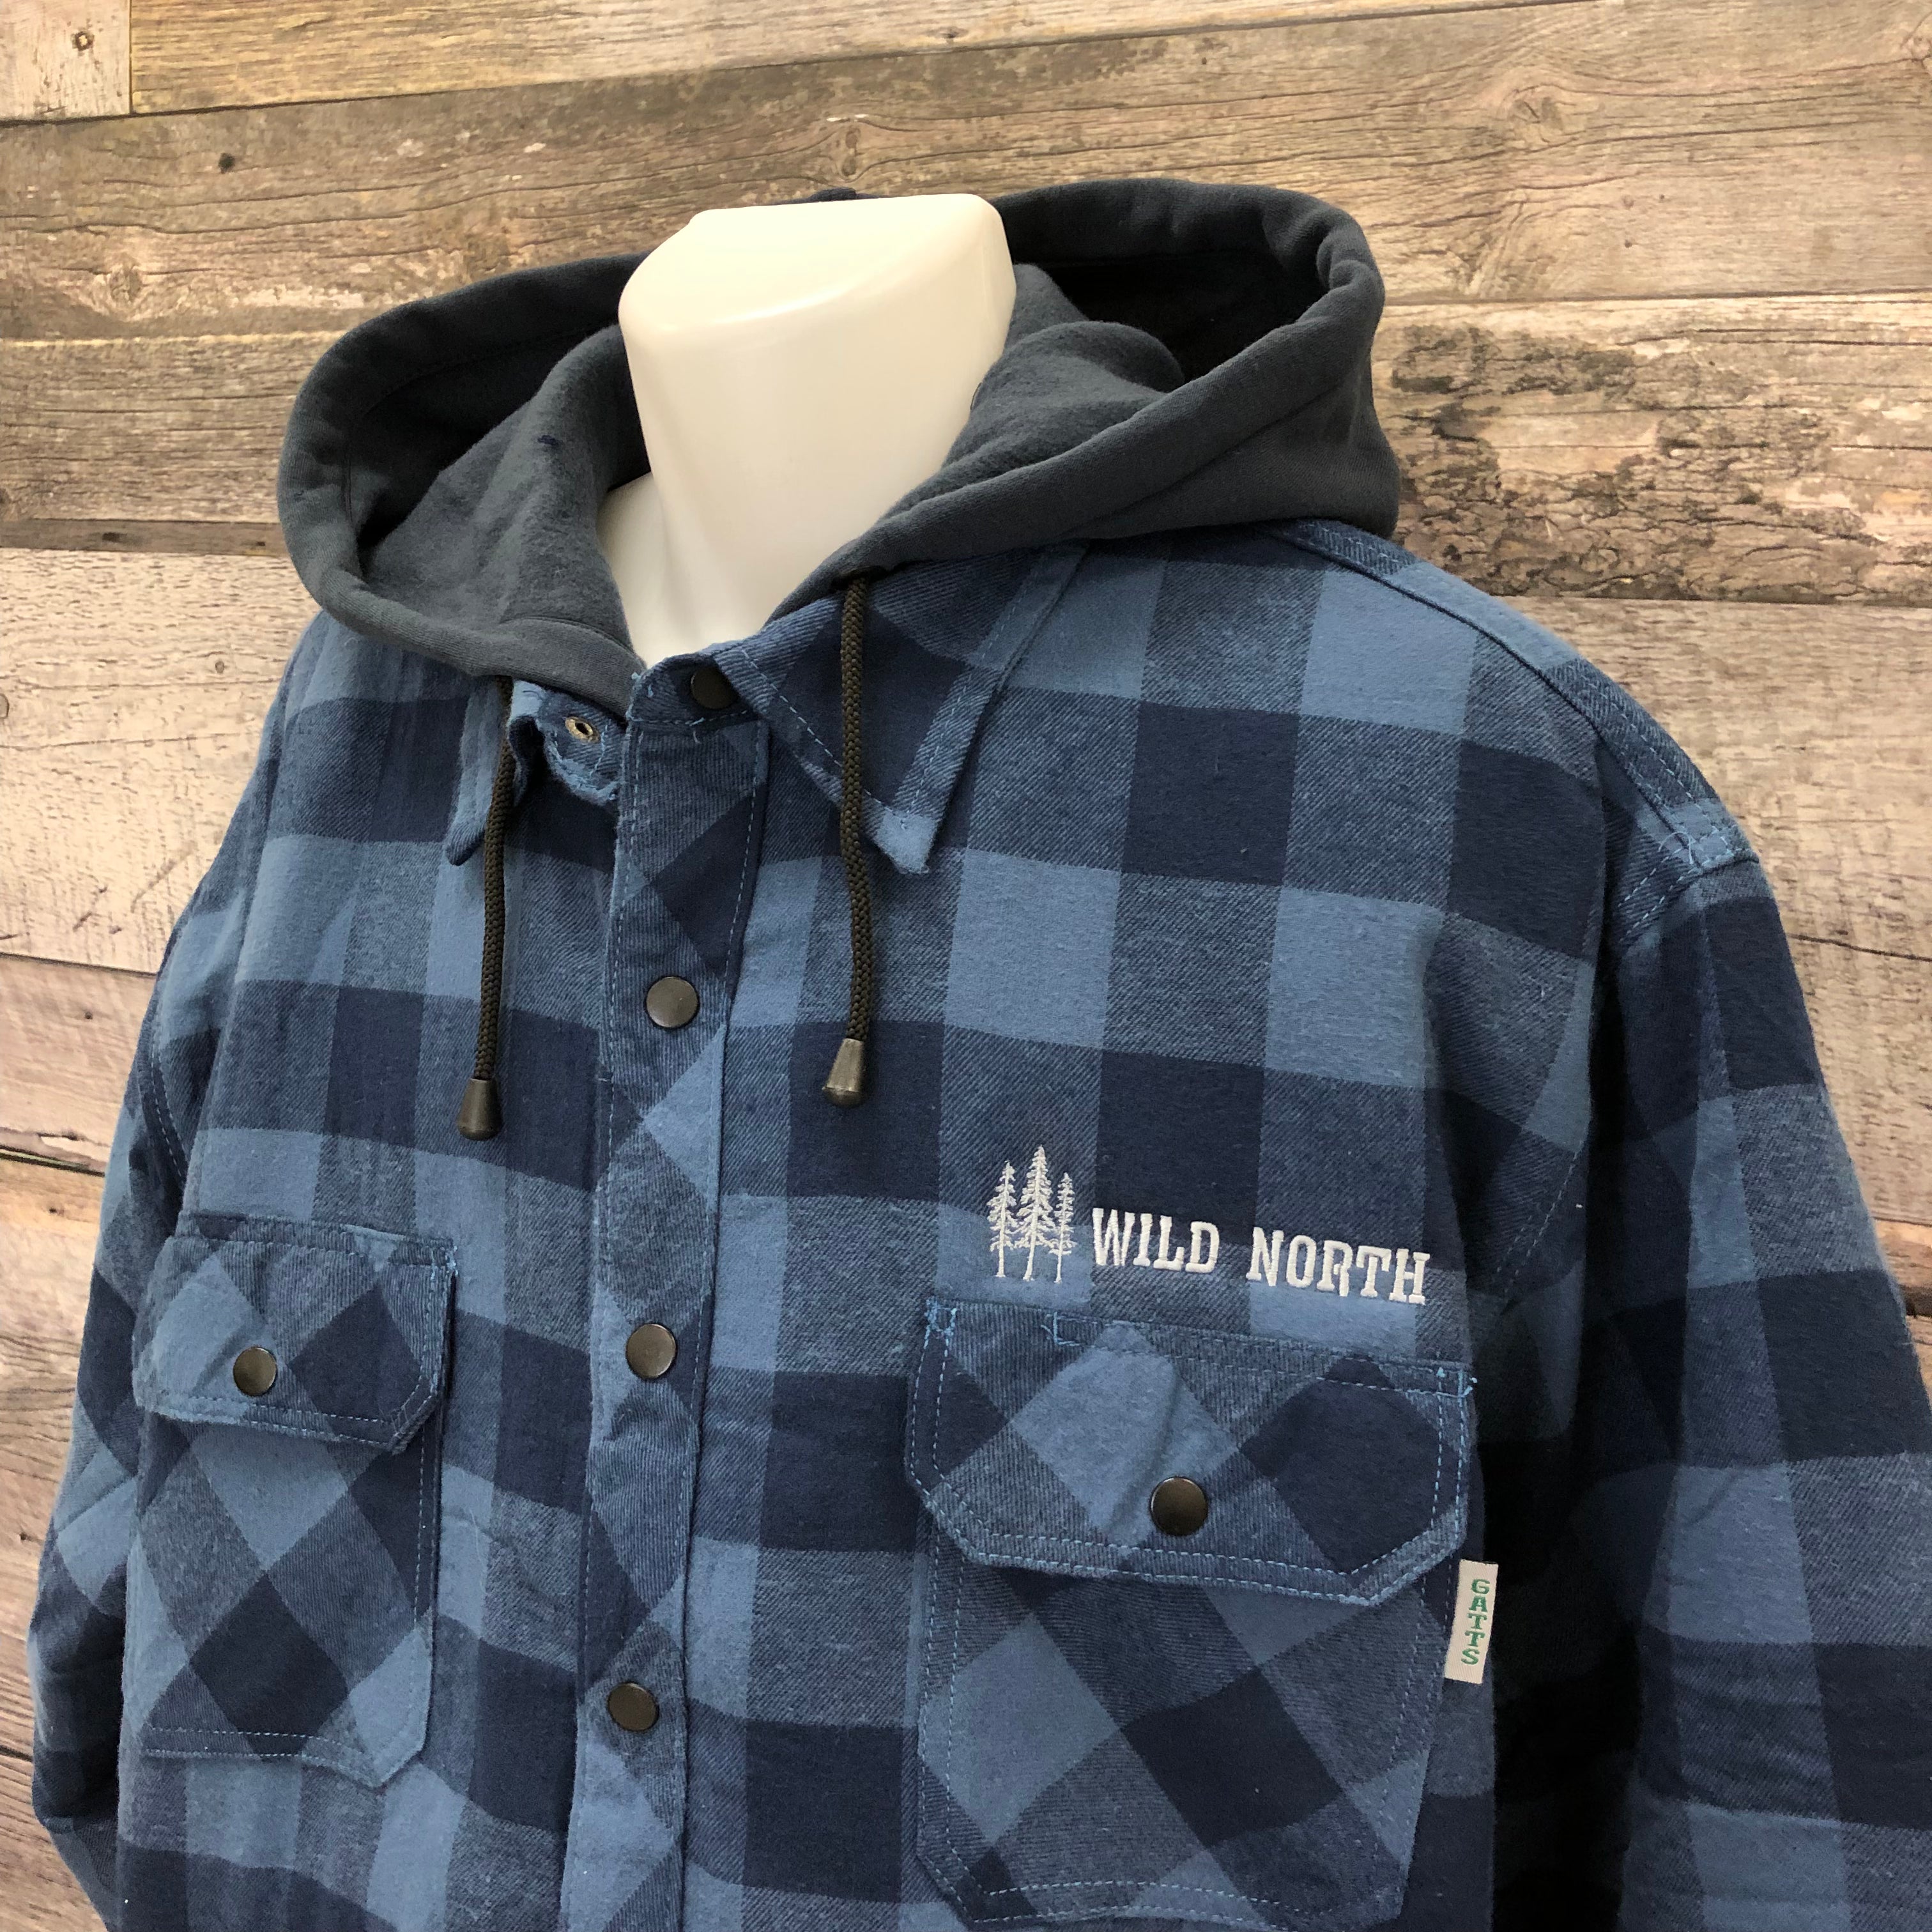 Wild North Unisex Hooded Plaid Quilted Jacket